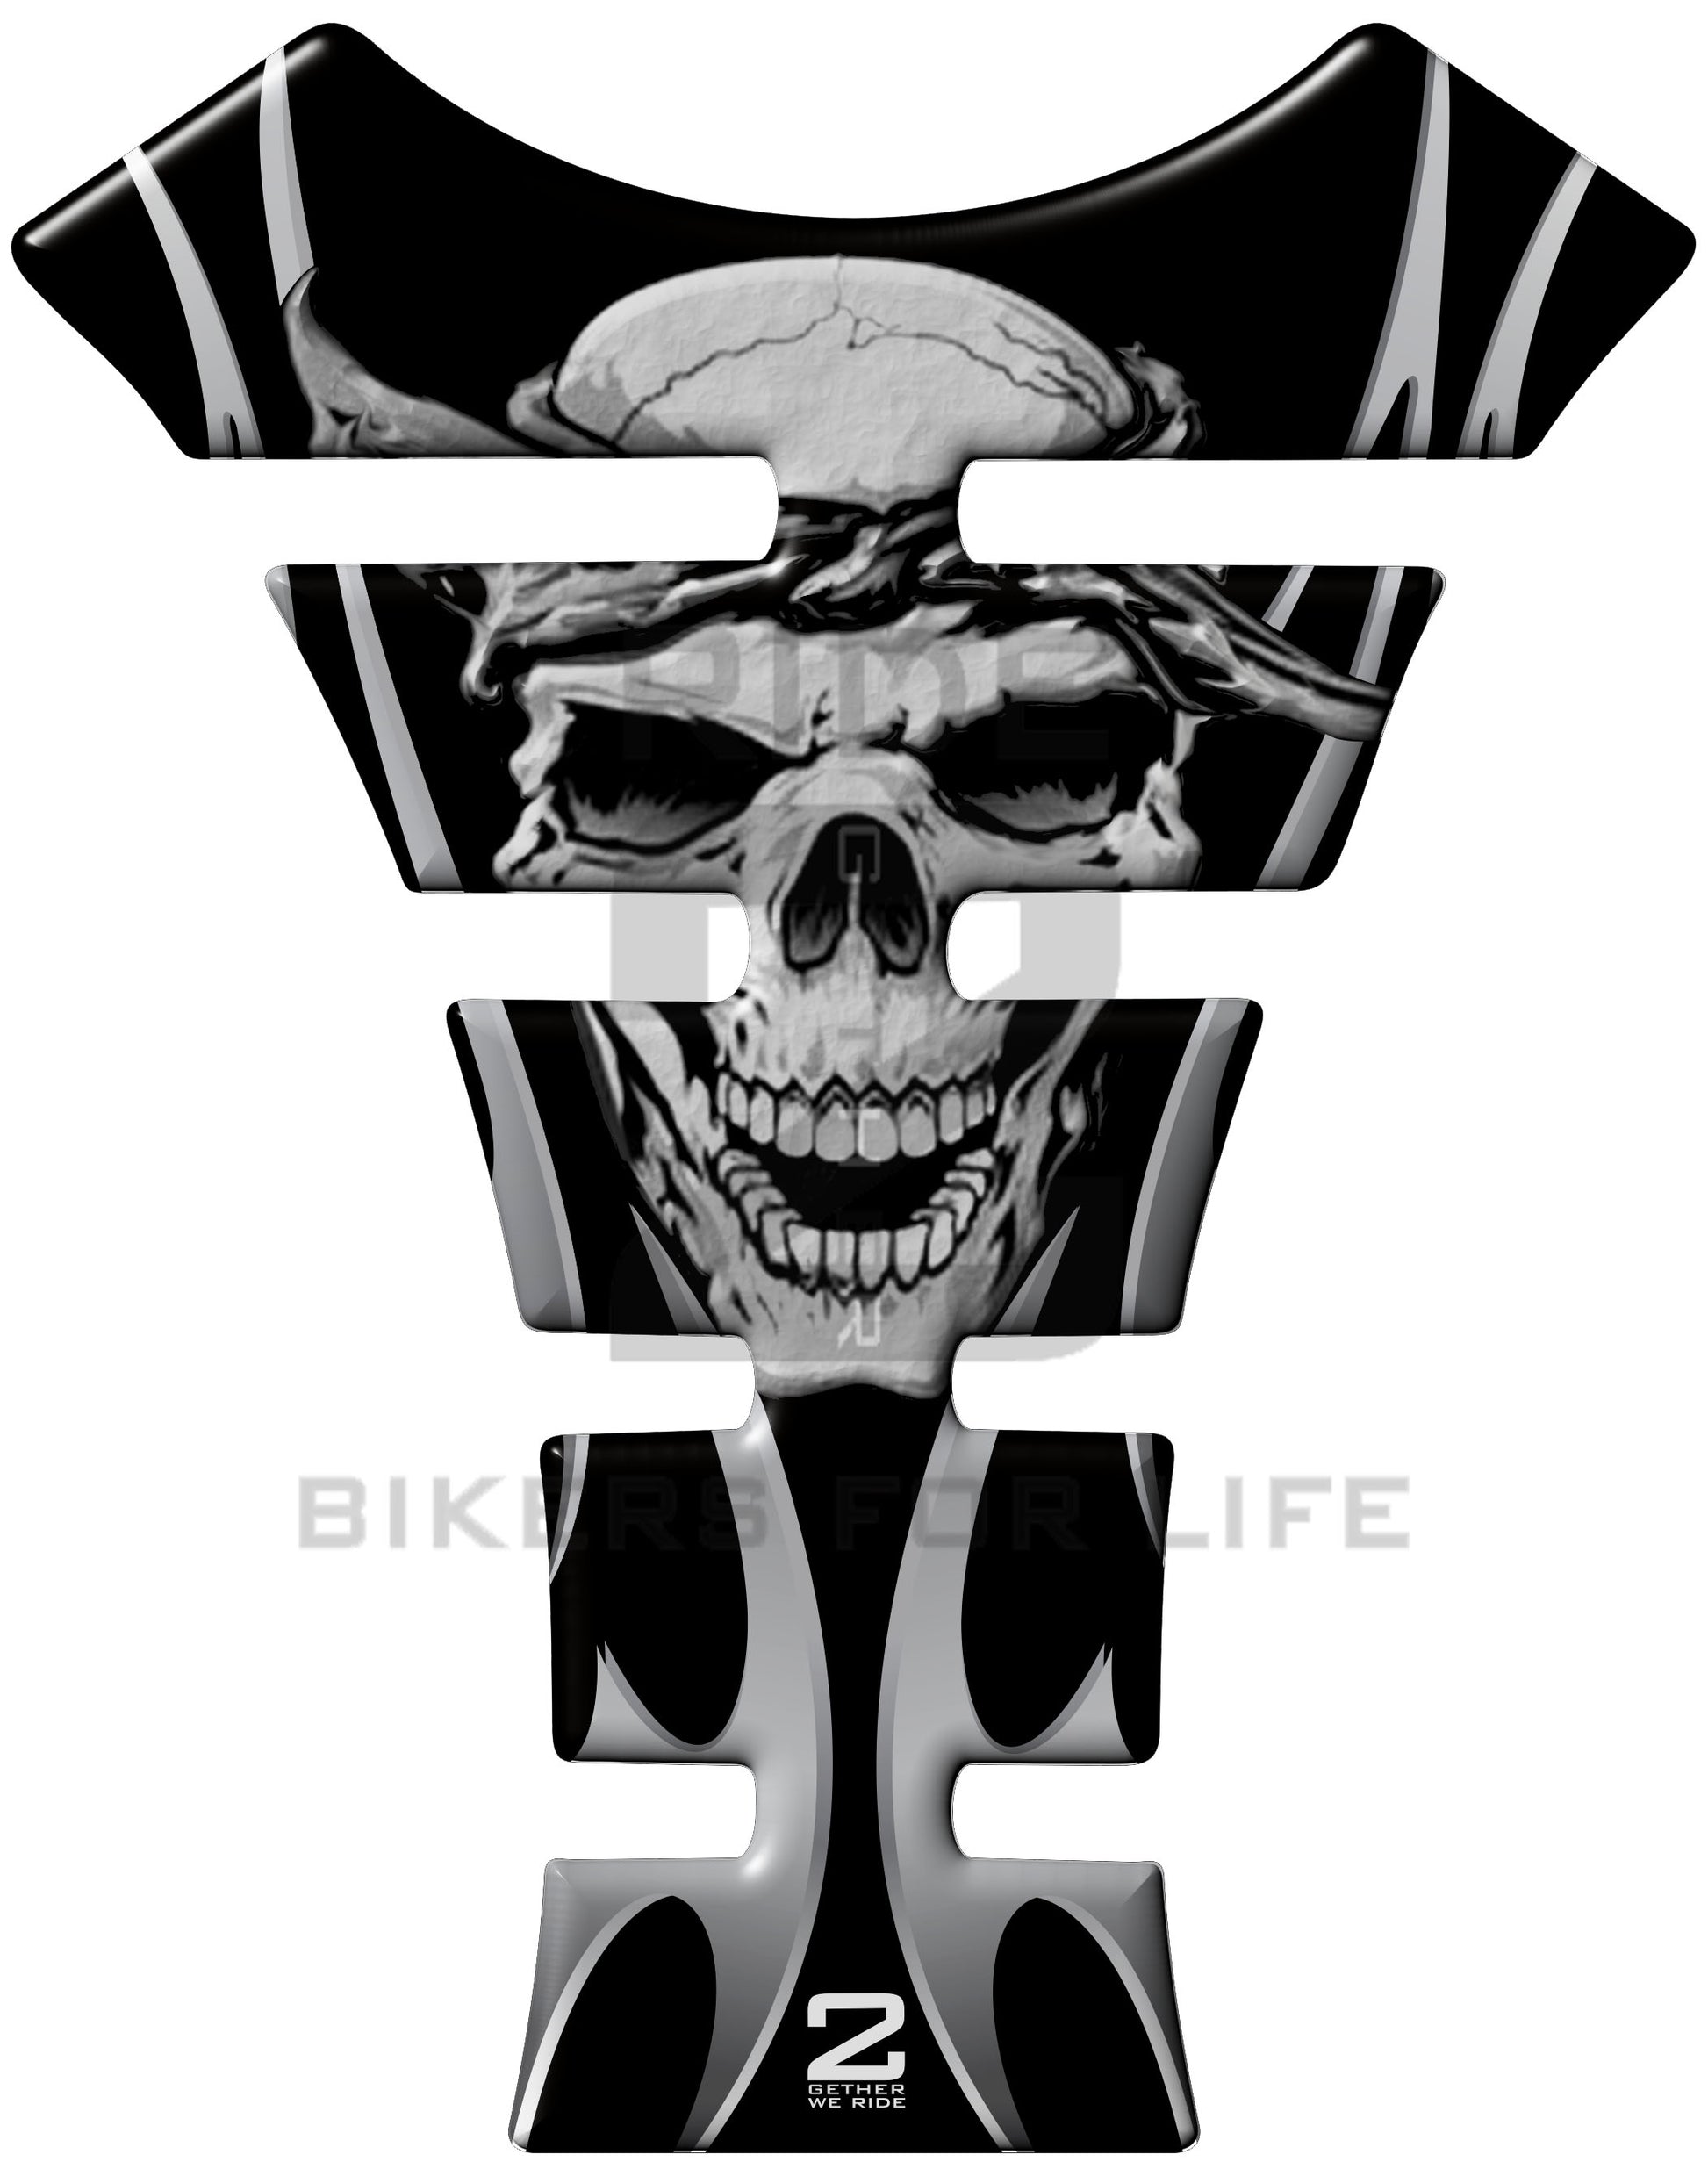 Universal Fit Black Reaper Motor Bike Tank Pad Protector. A Street Pad which fits most motorcycles.